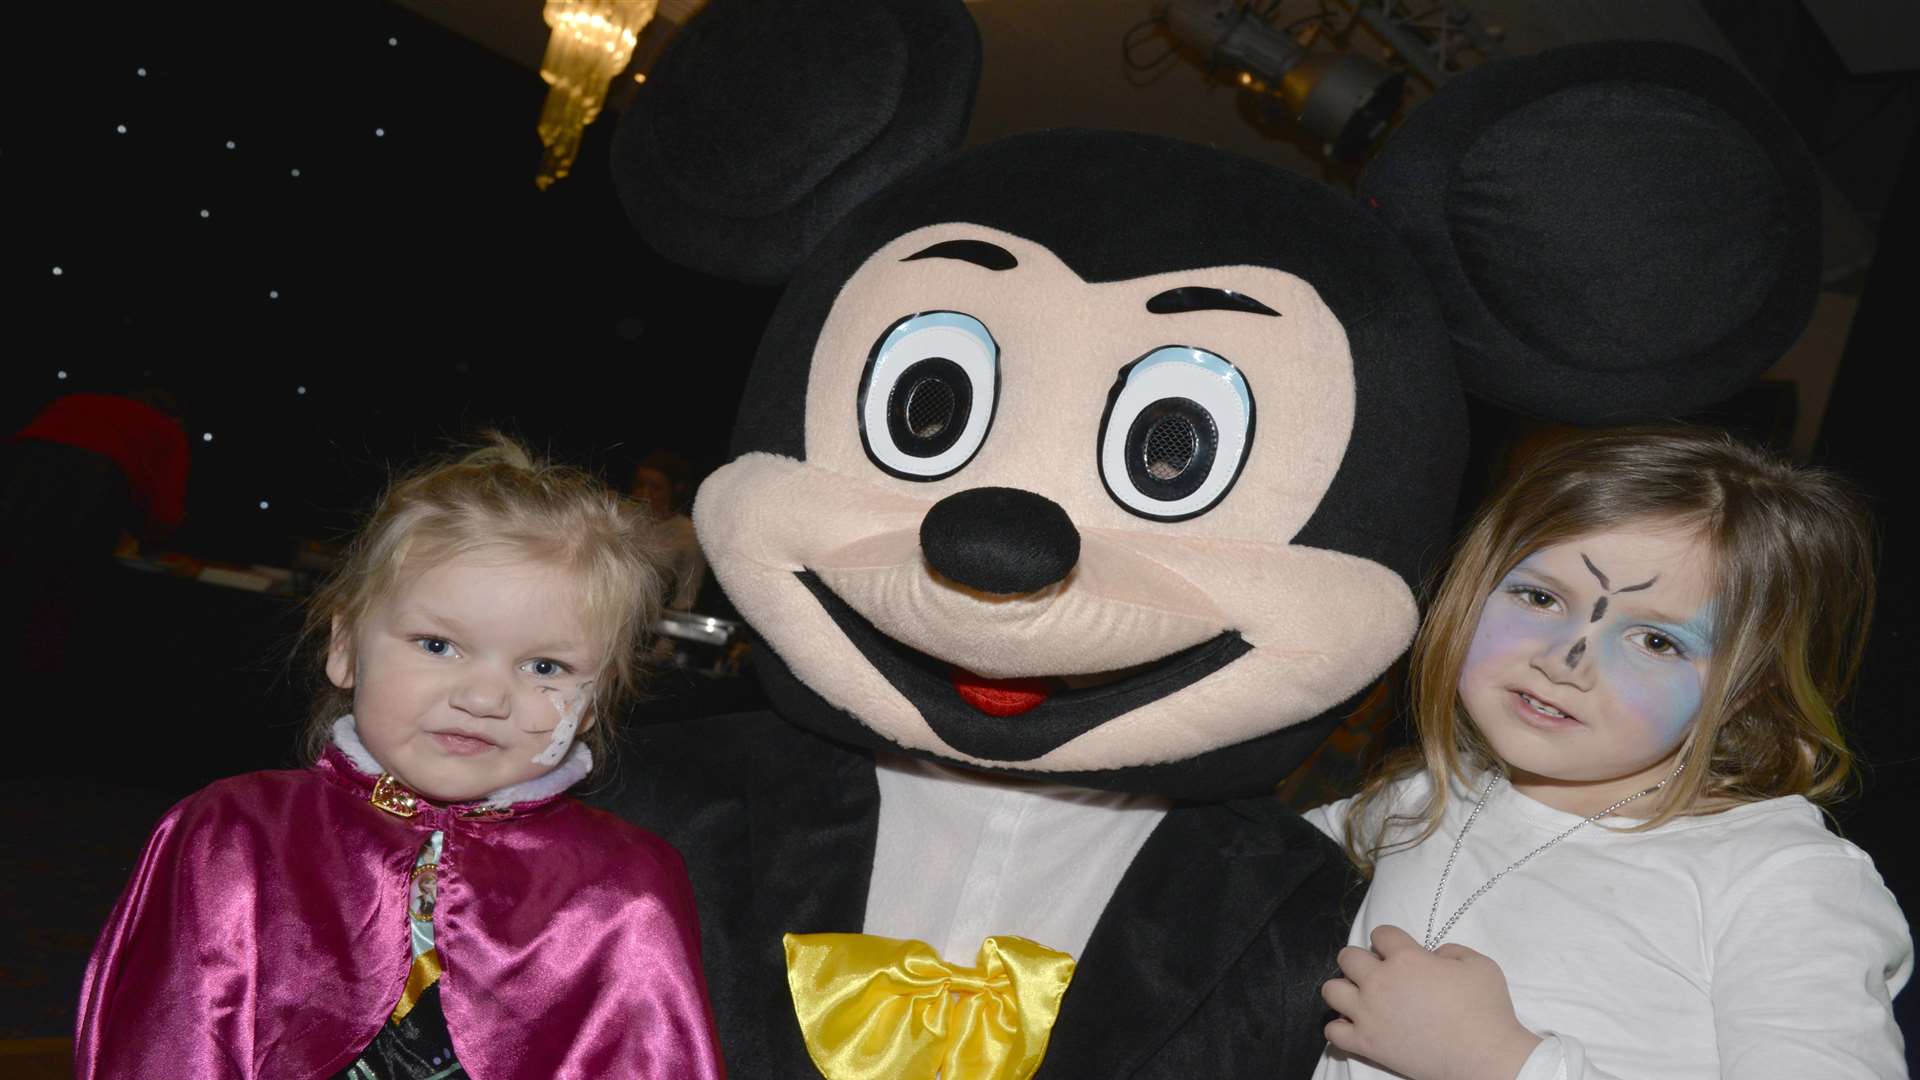 Mary,3, and Amilie, 5, with Mickey Mouse